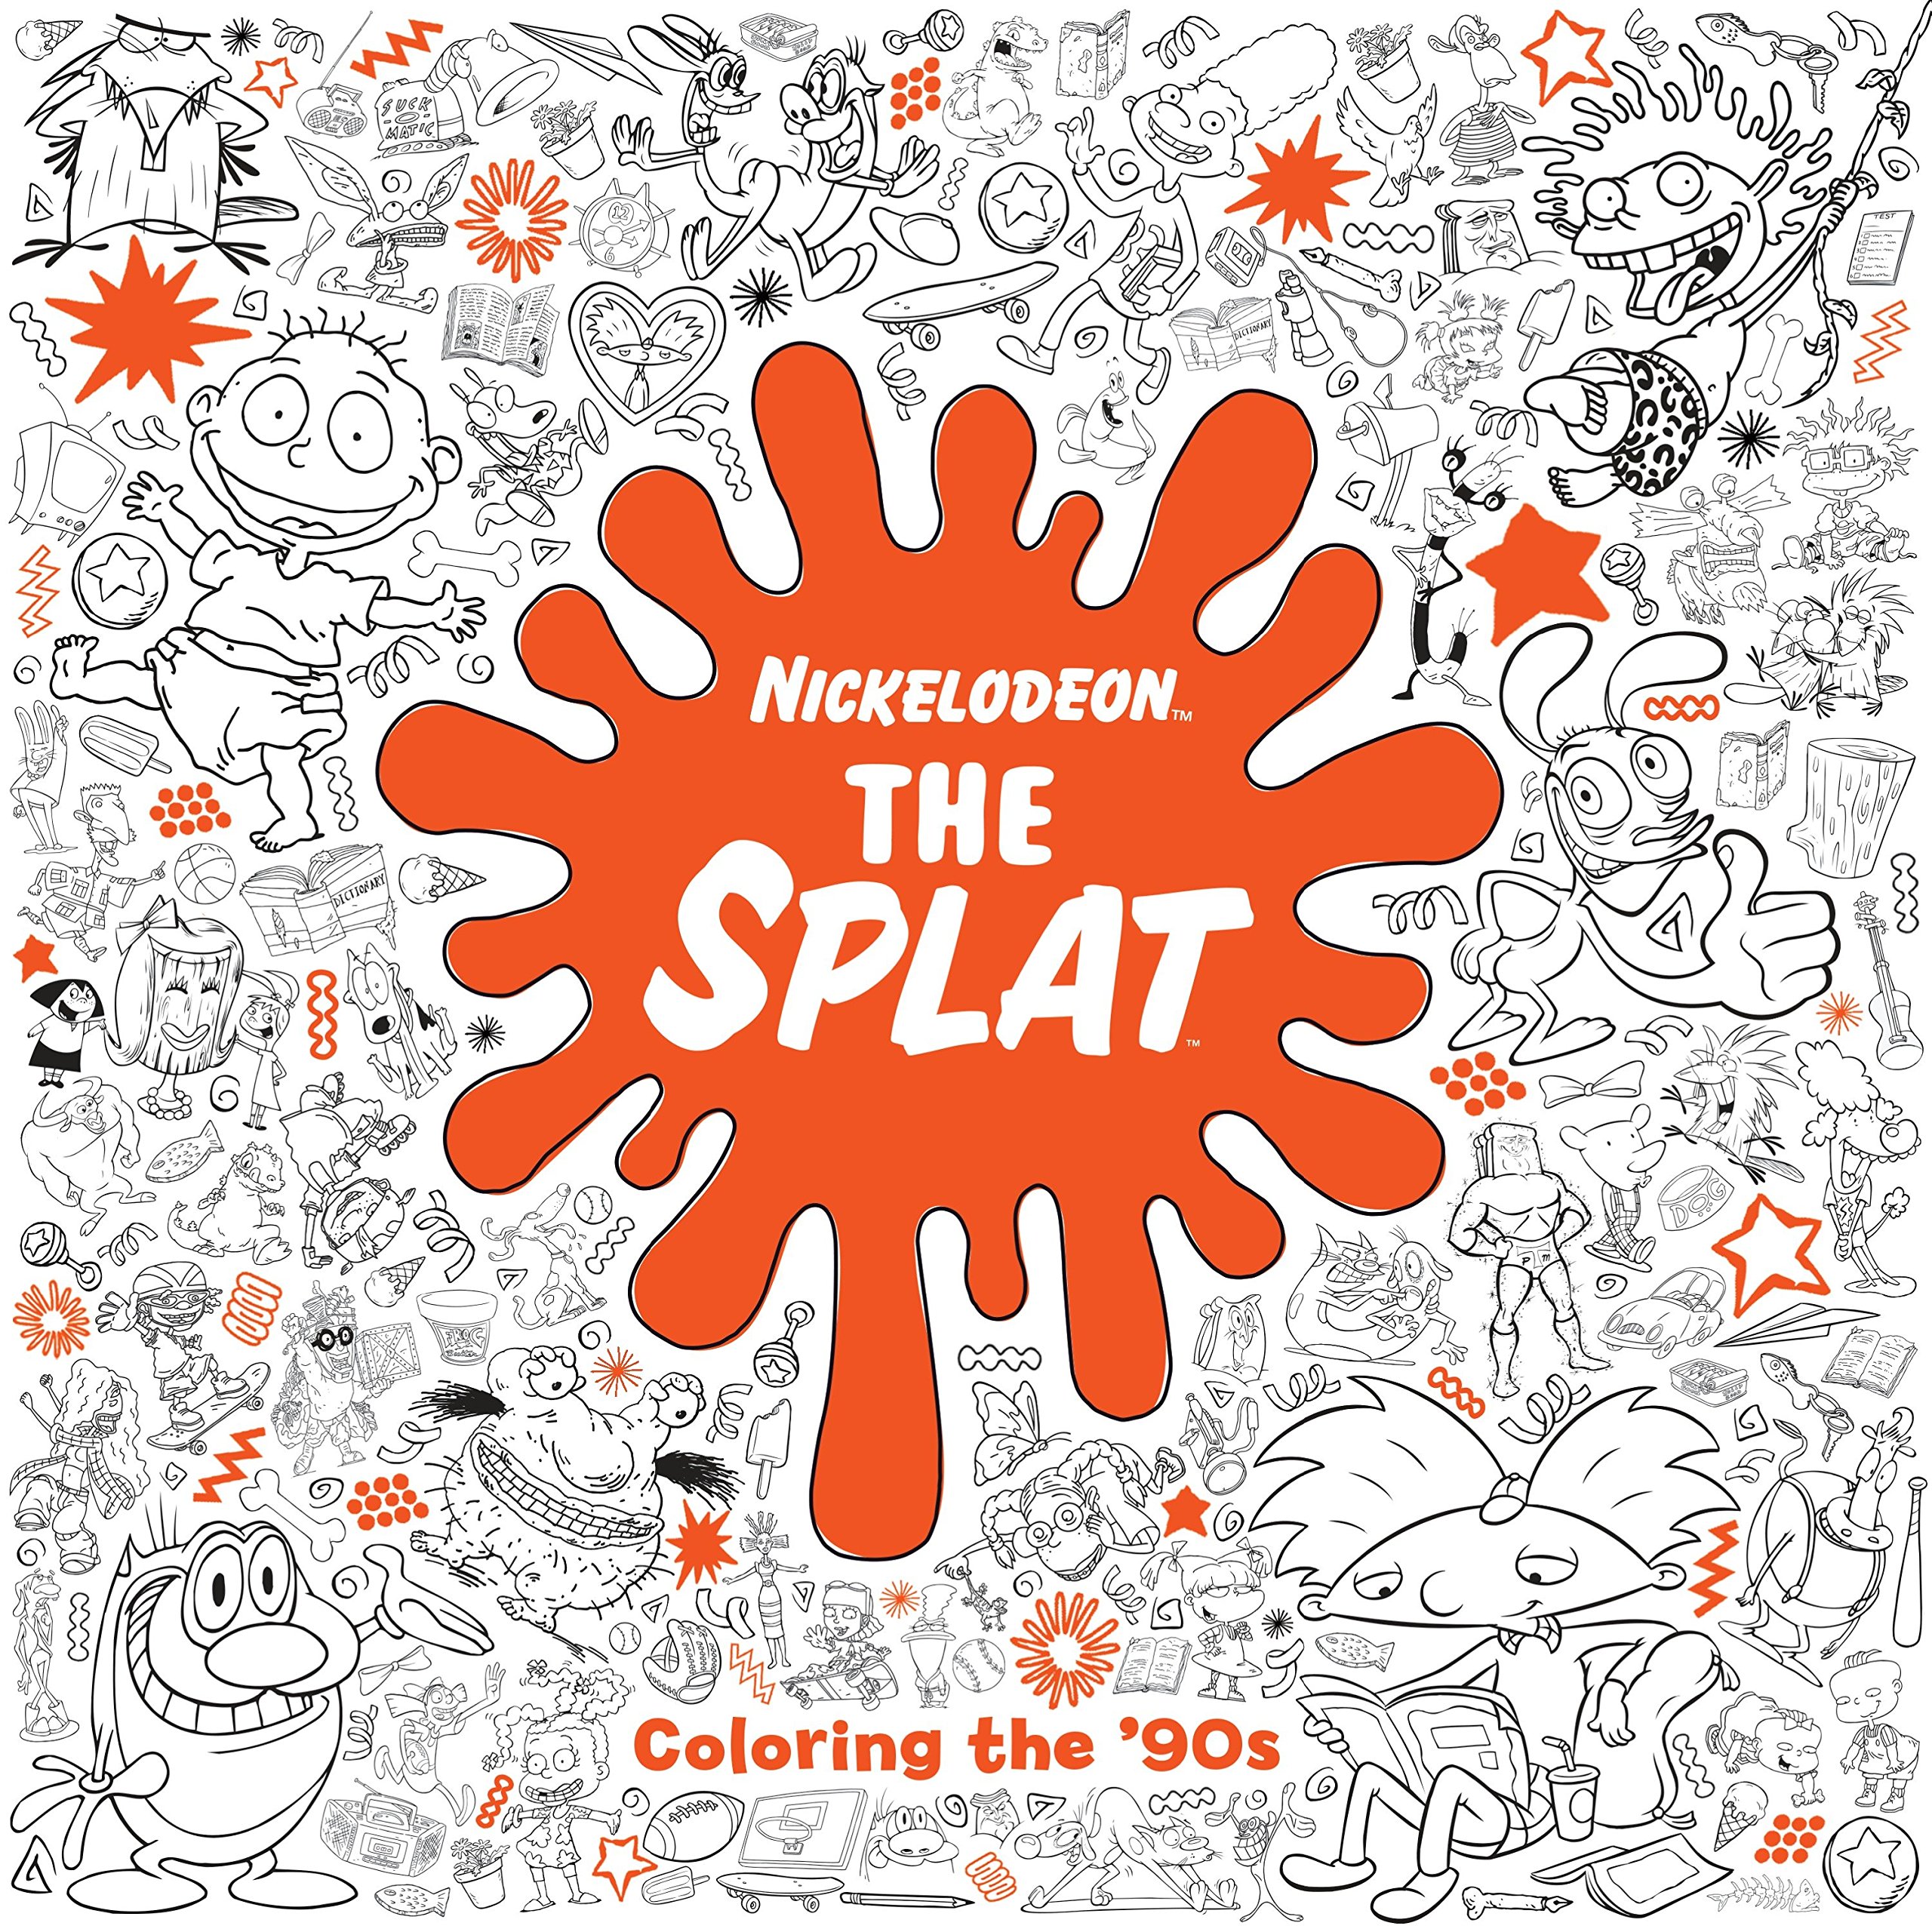 The Splat: Coloring the ’90s